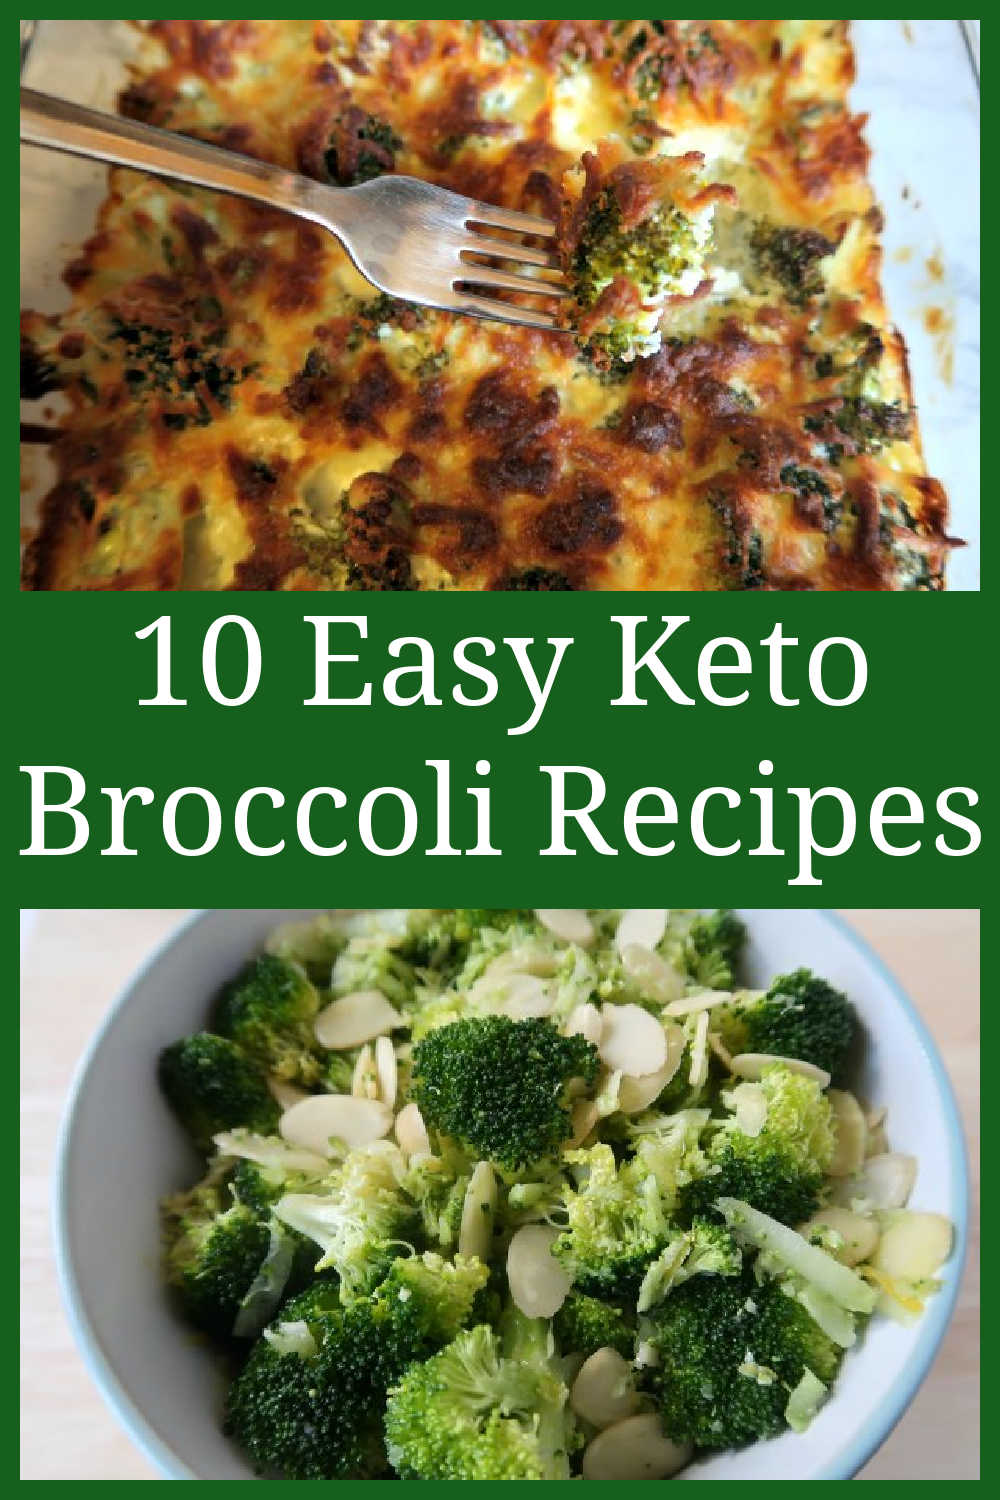 10 Keto Broccoli Recipes - The best easy low carb friendly recipe ideas - including delicious salad, creamy soup and extra cheesy casserole meals.